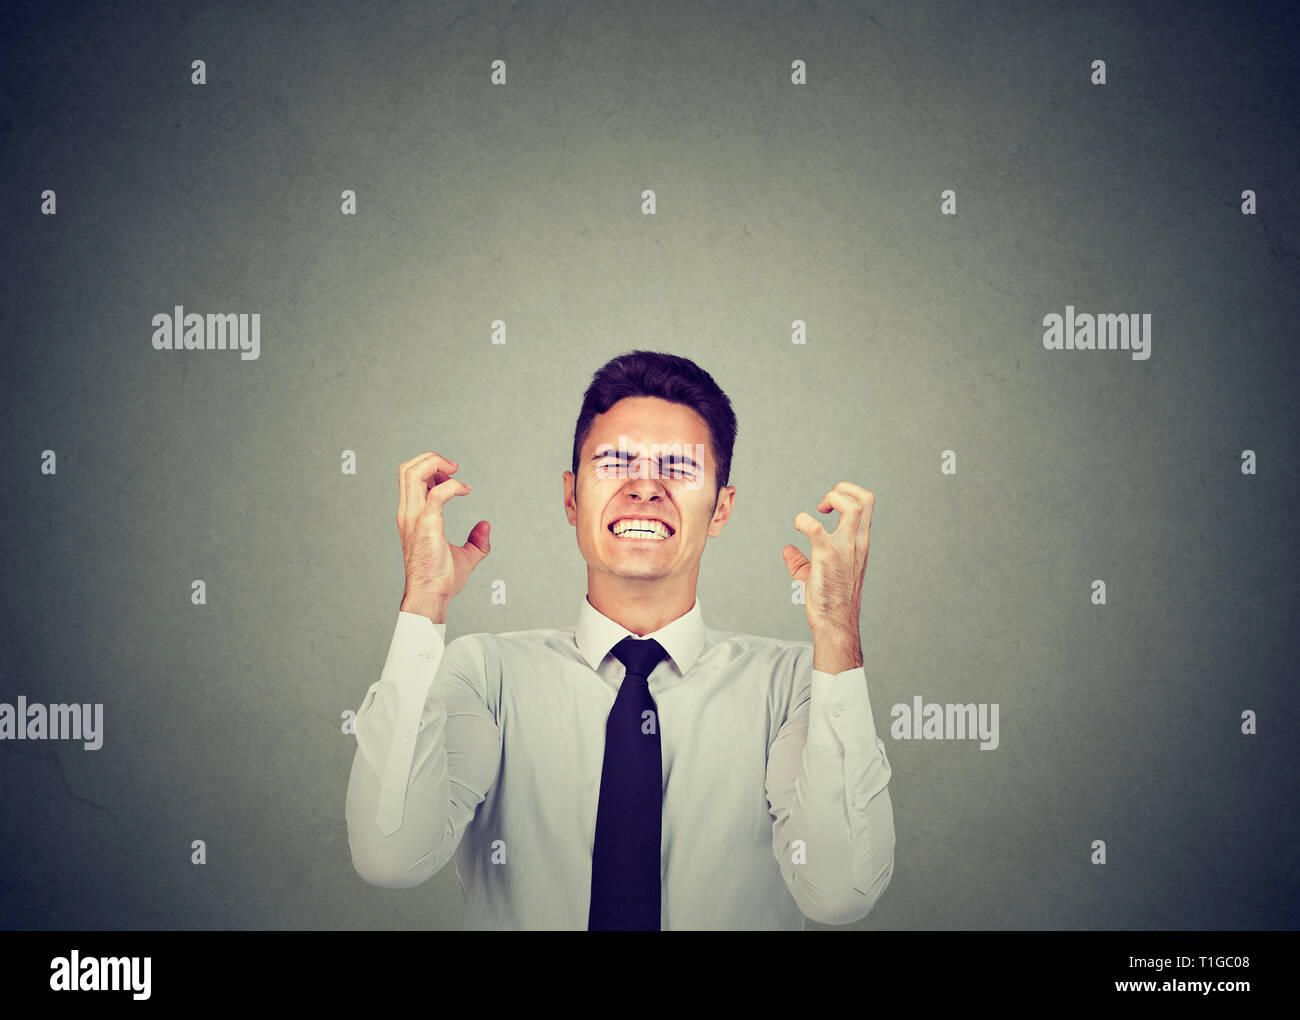 Angry business man shouting in frustration and gesturing with hands Stock Photo